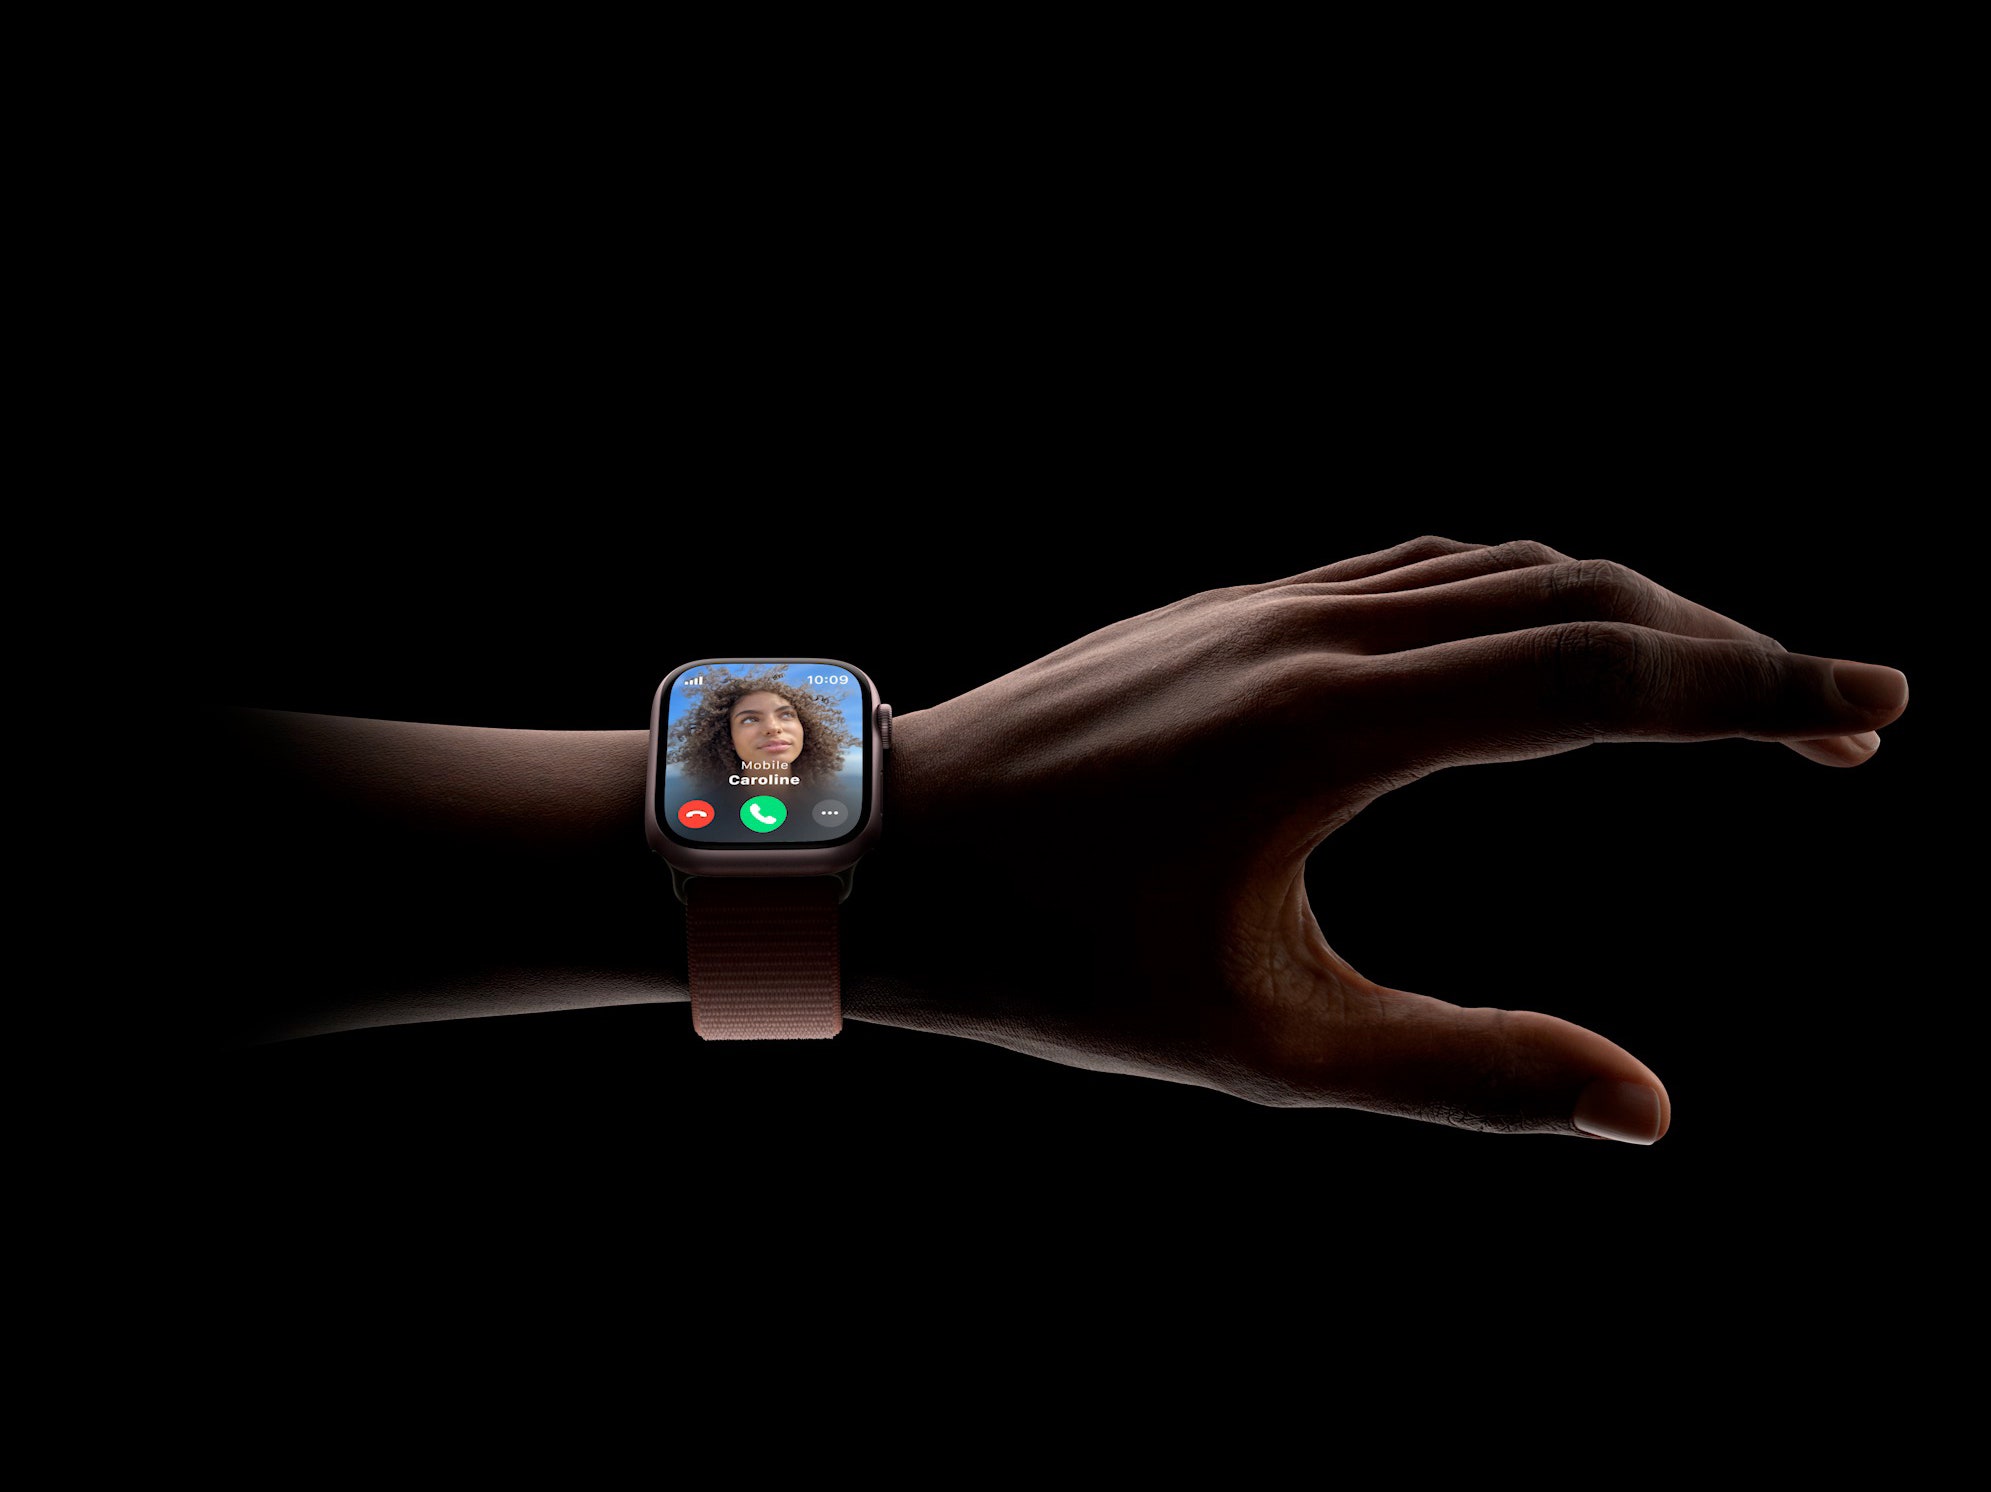 Apple Watch shown on a person's arm